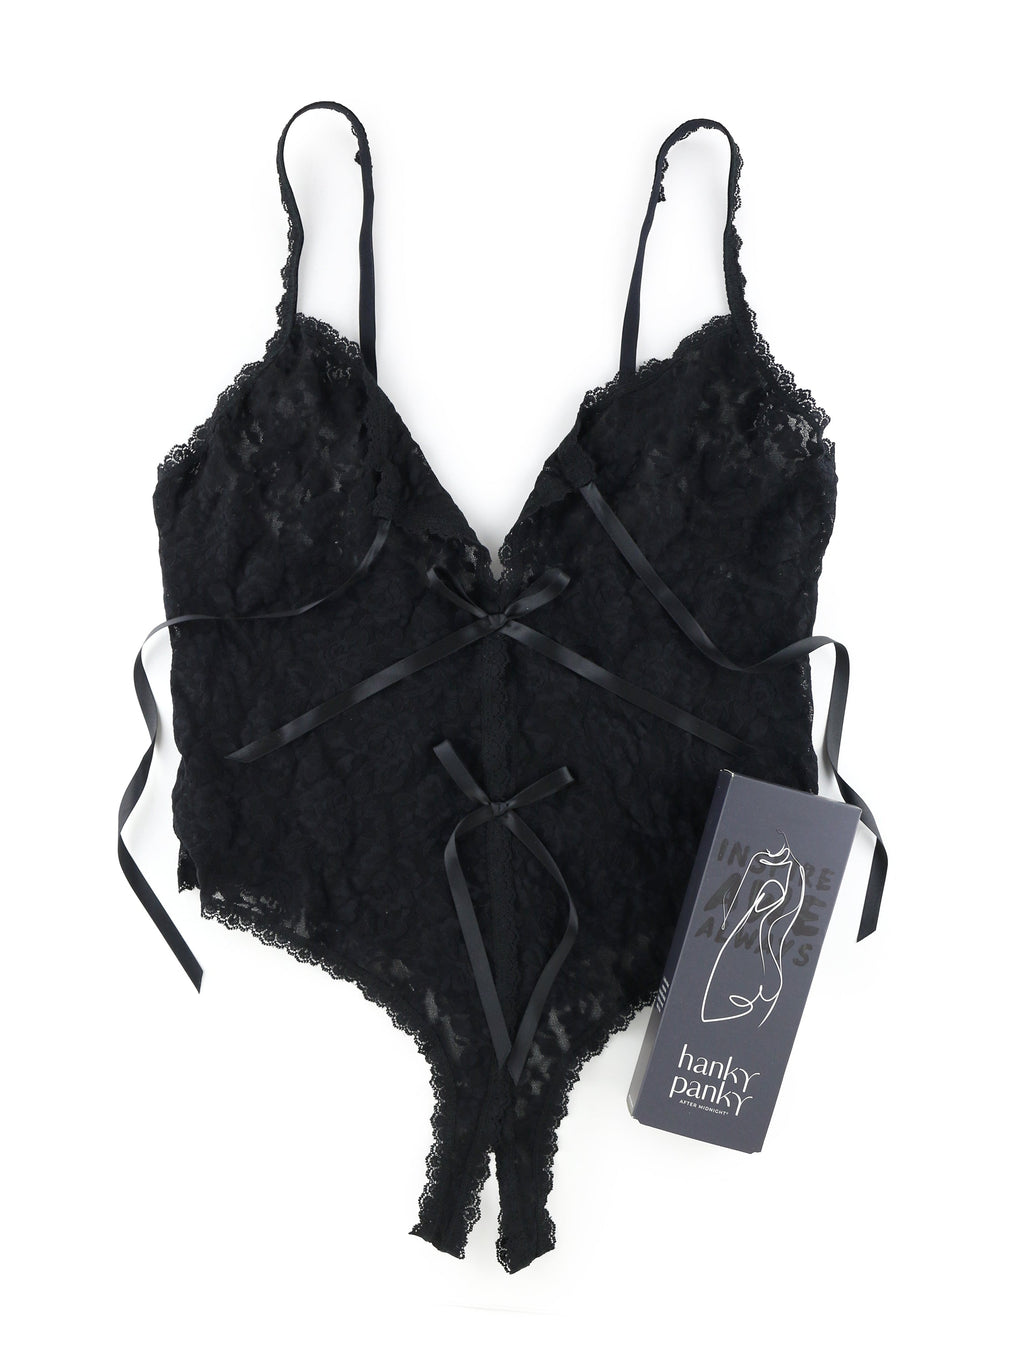 Plus Size Birthday Suit Packaged Crotchless Teddy Sale | Hanky Panky